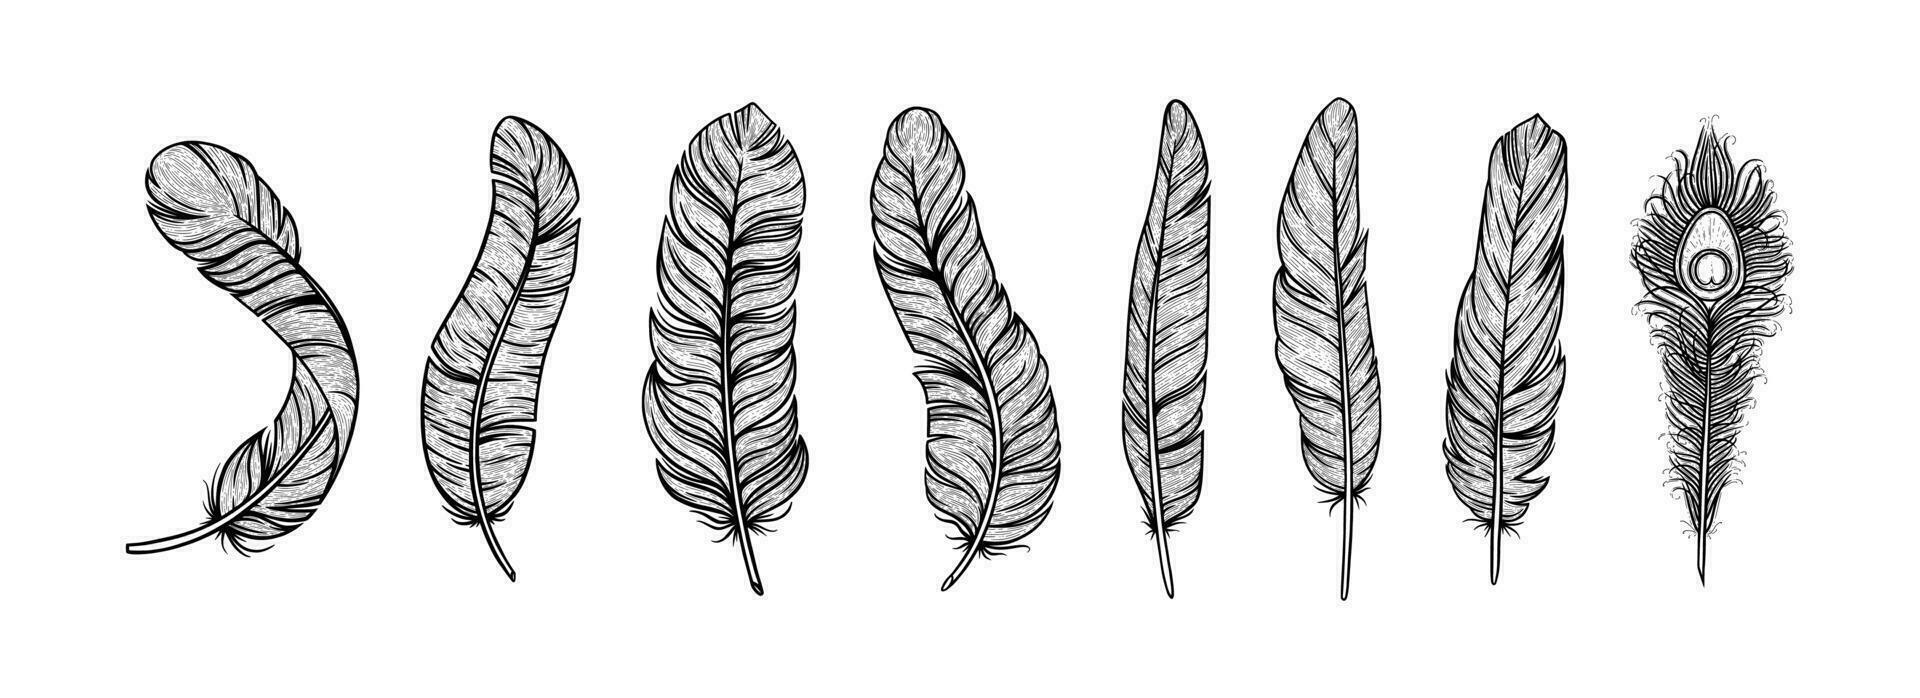 Feathers in ethnic style. Set of indian bird feathers with peackock one isolated in white background. Vector illustration